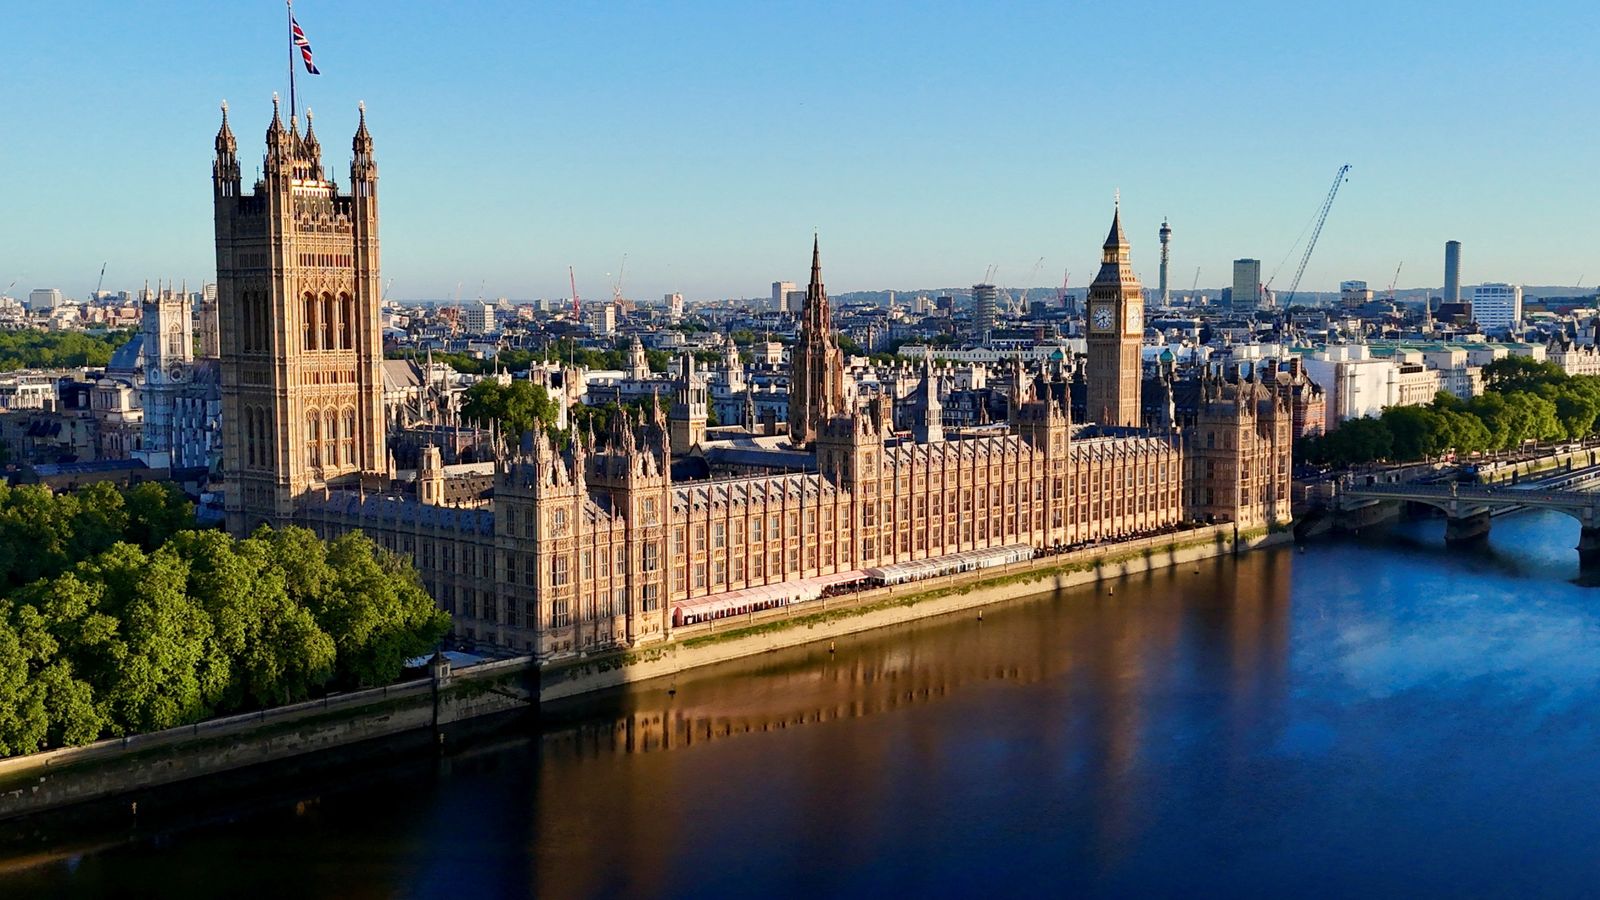 Man arrested over unsolicited messages sent to MPs and others in Westminster honey trap scandal